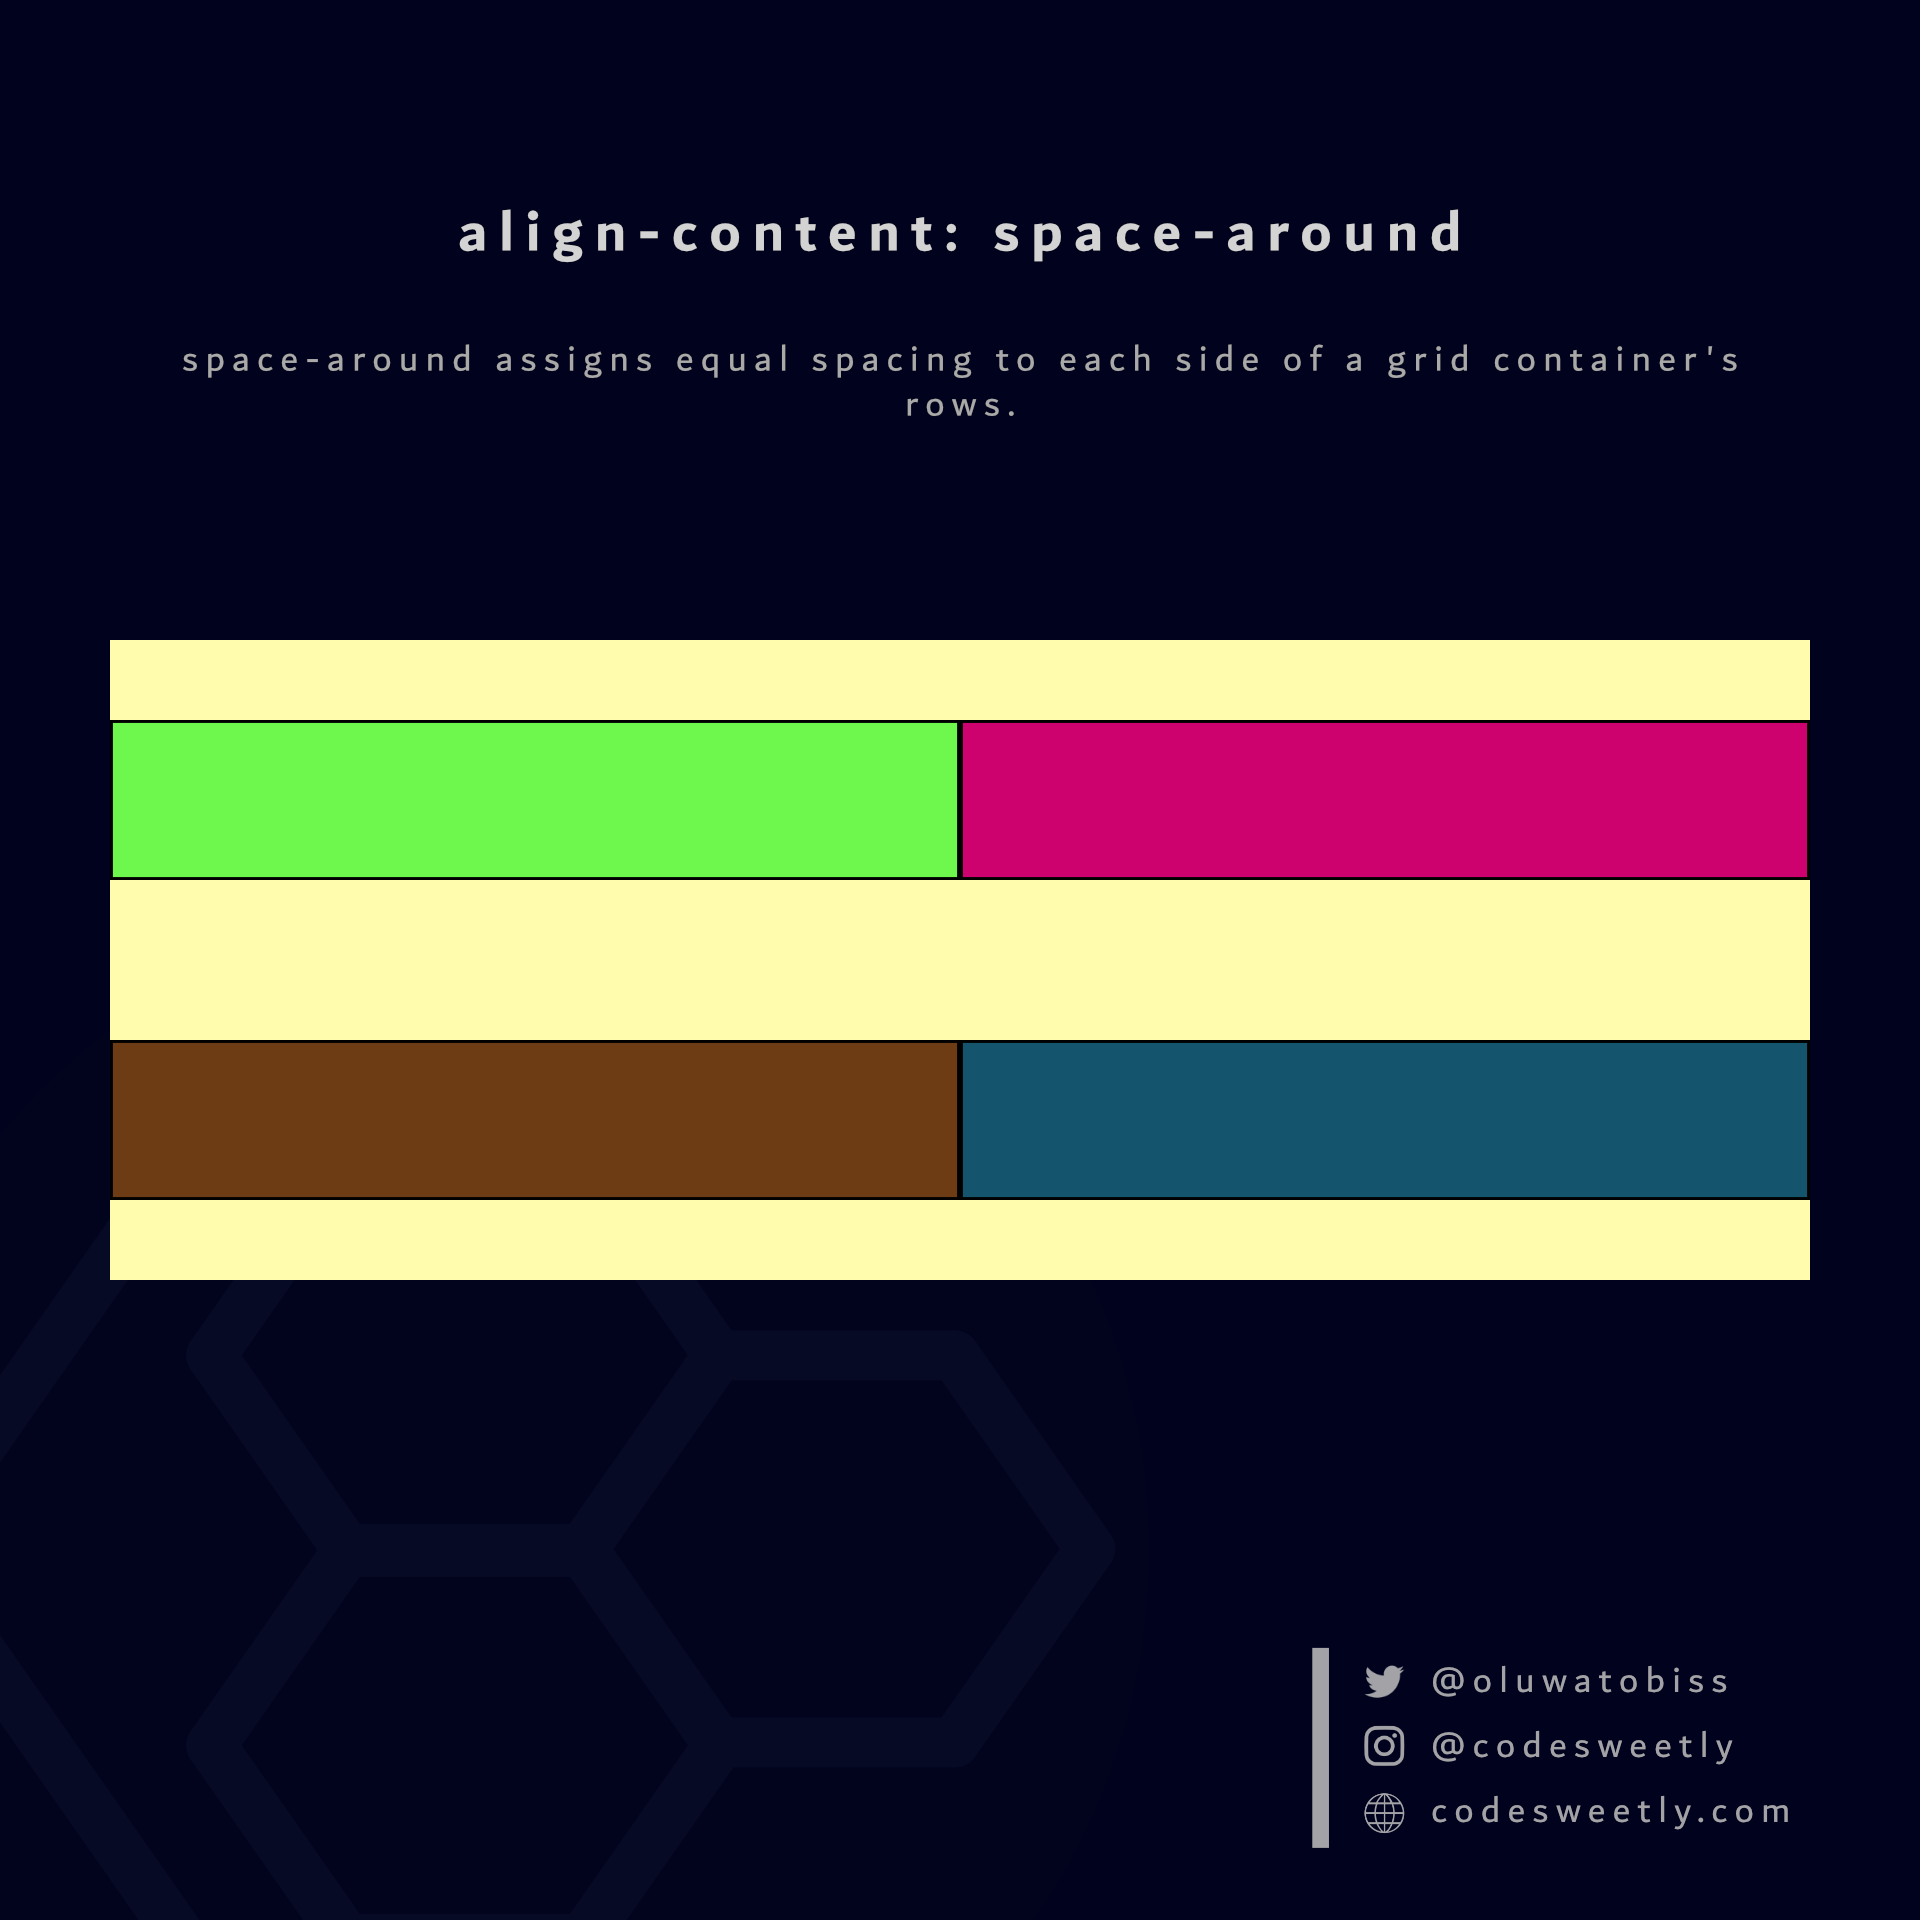 align-content's space-around value assigns equal spacing to each side of the grid container's rows